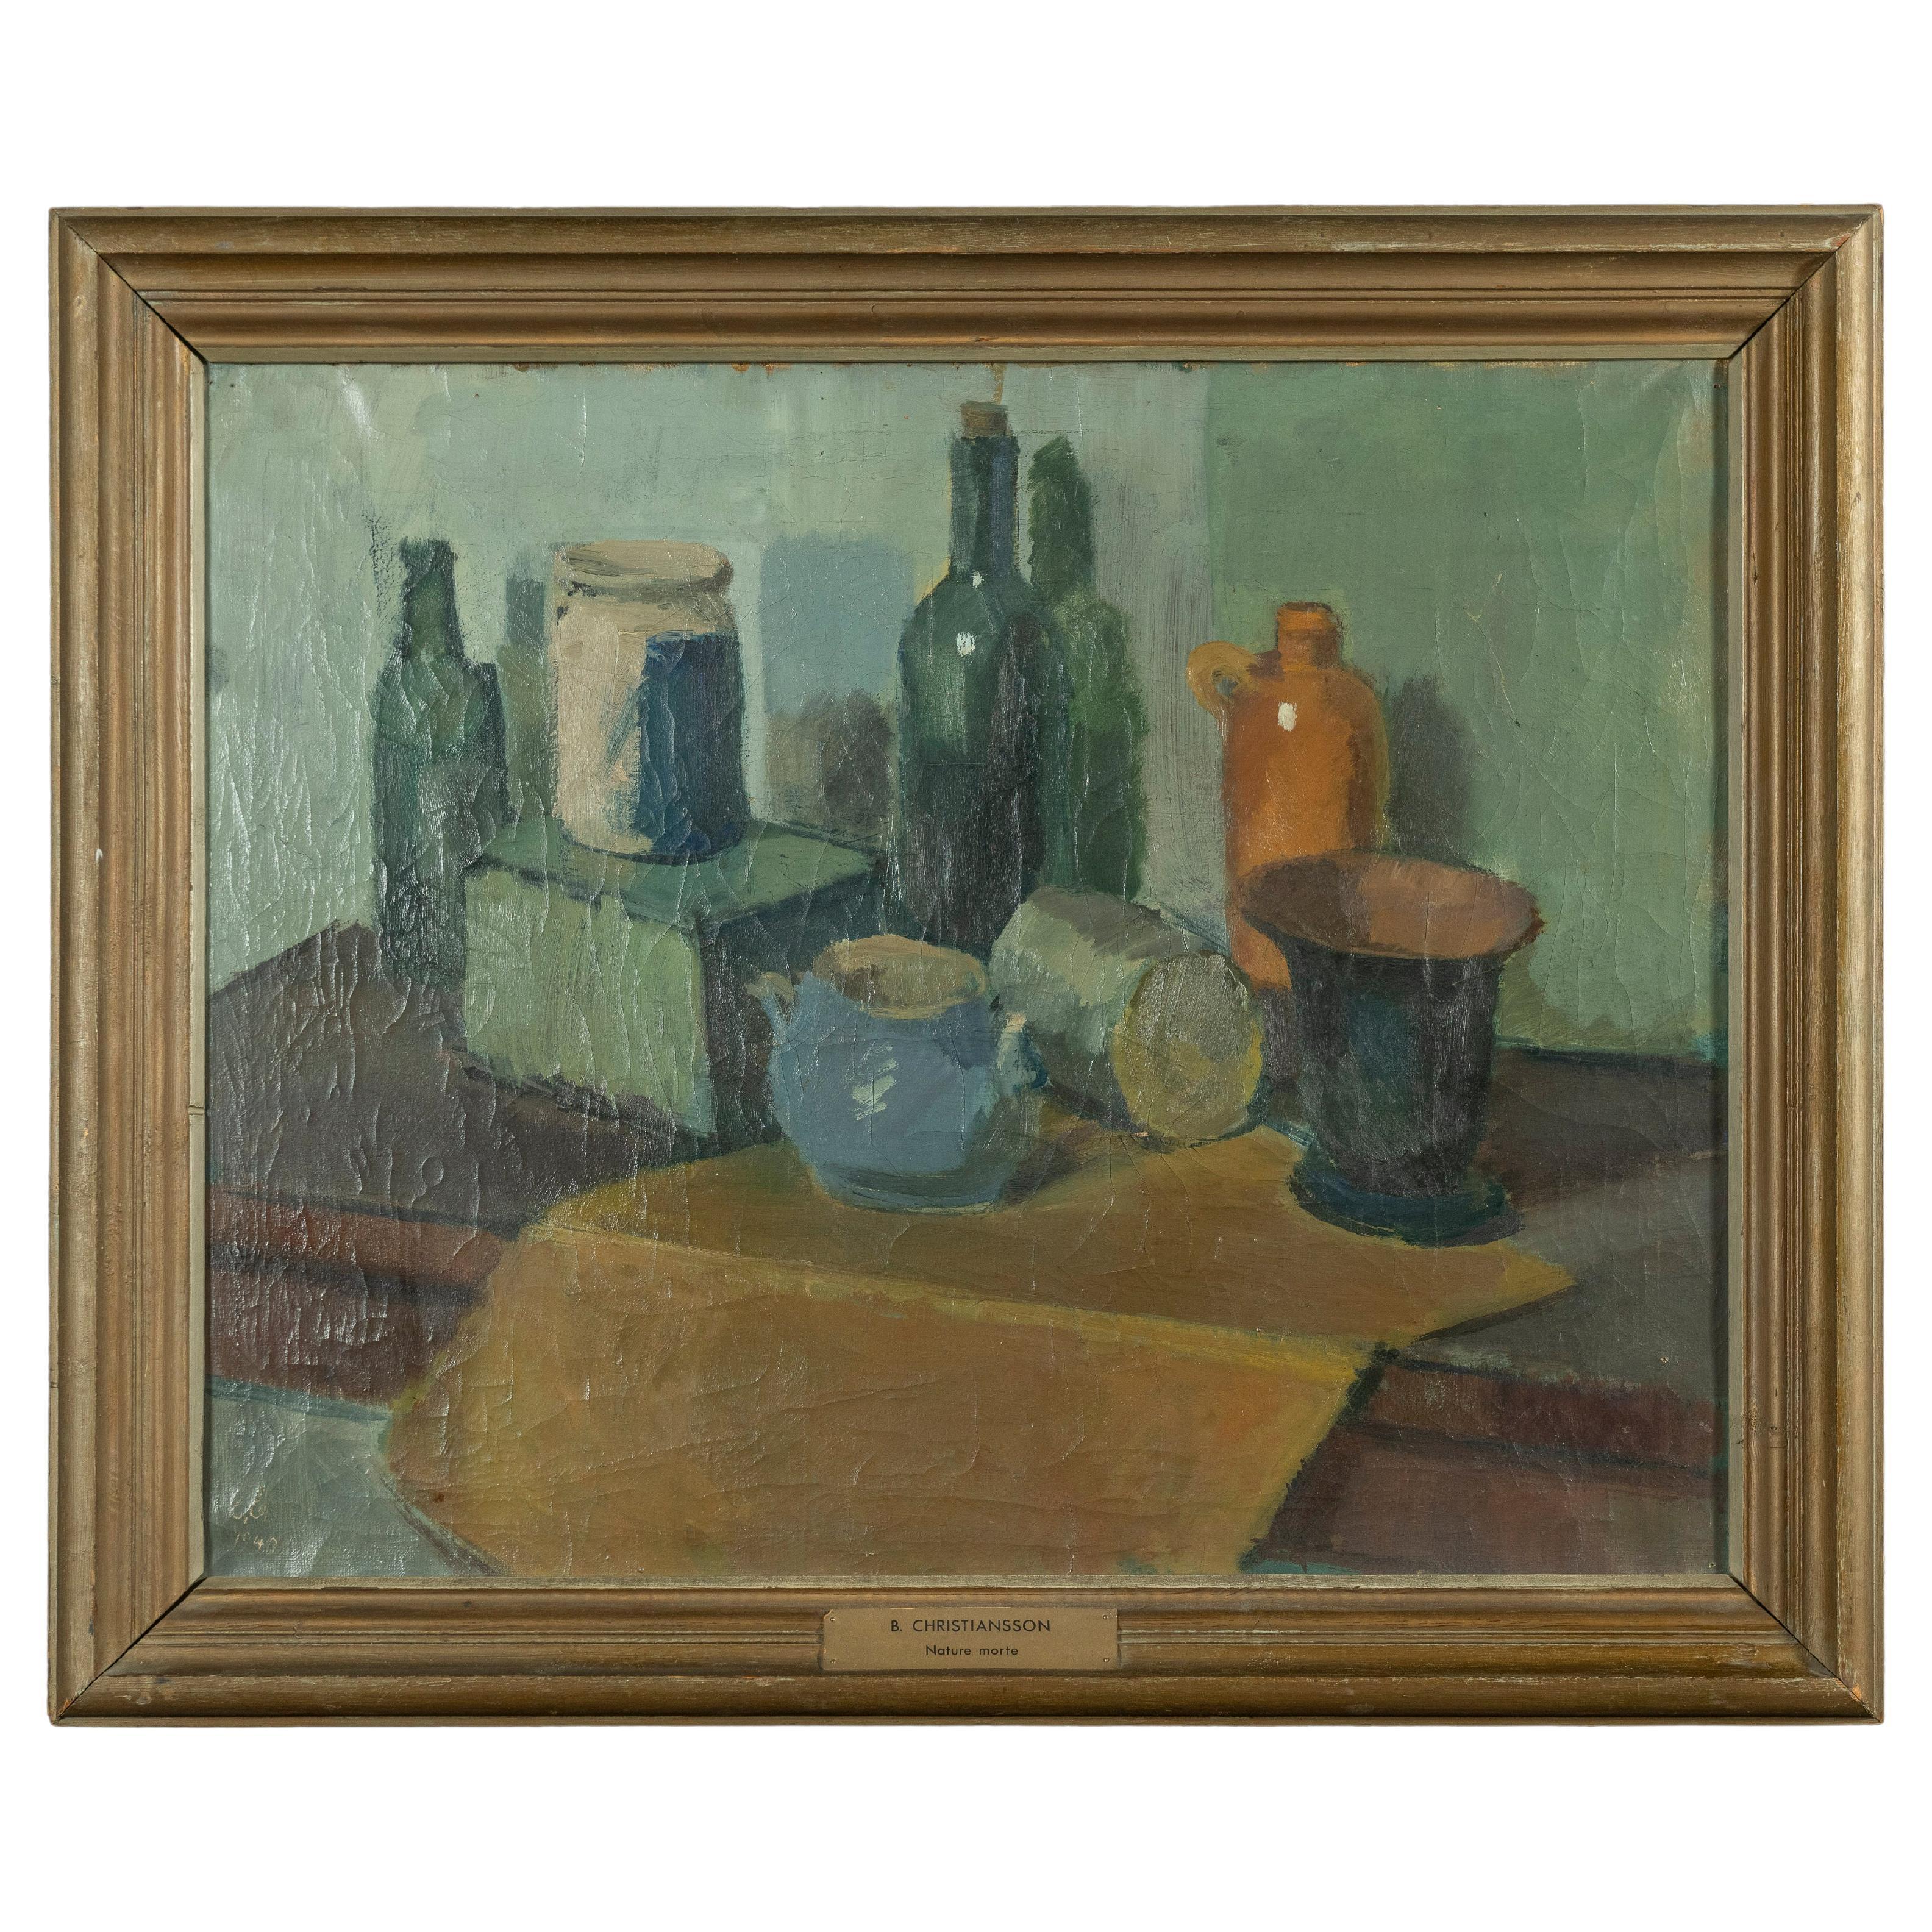 Vintage Midcentury Still Life Oil Painting Framed & Signed by B. Christiansson For Sale